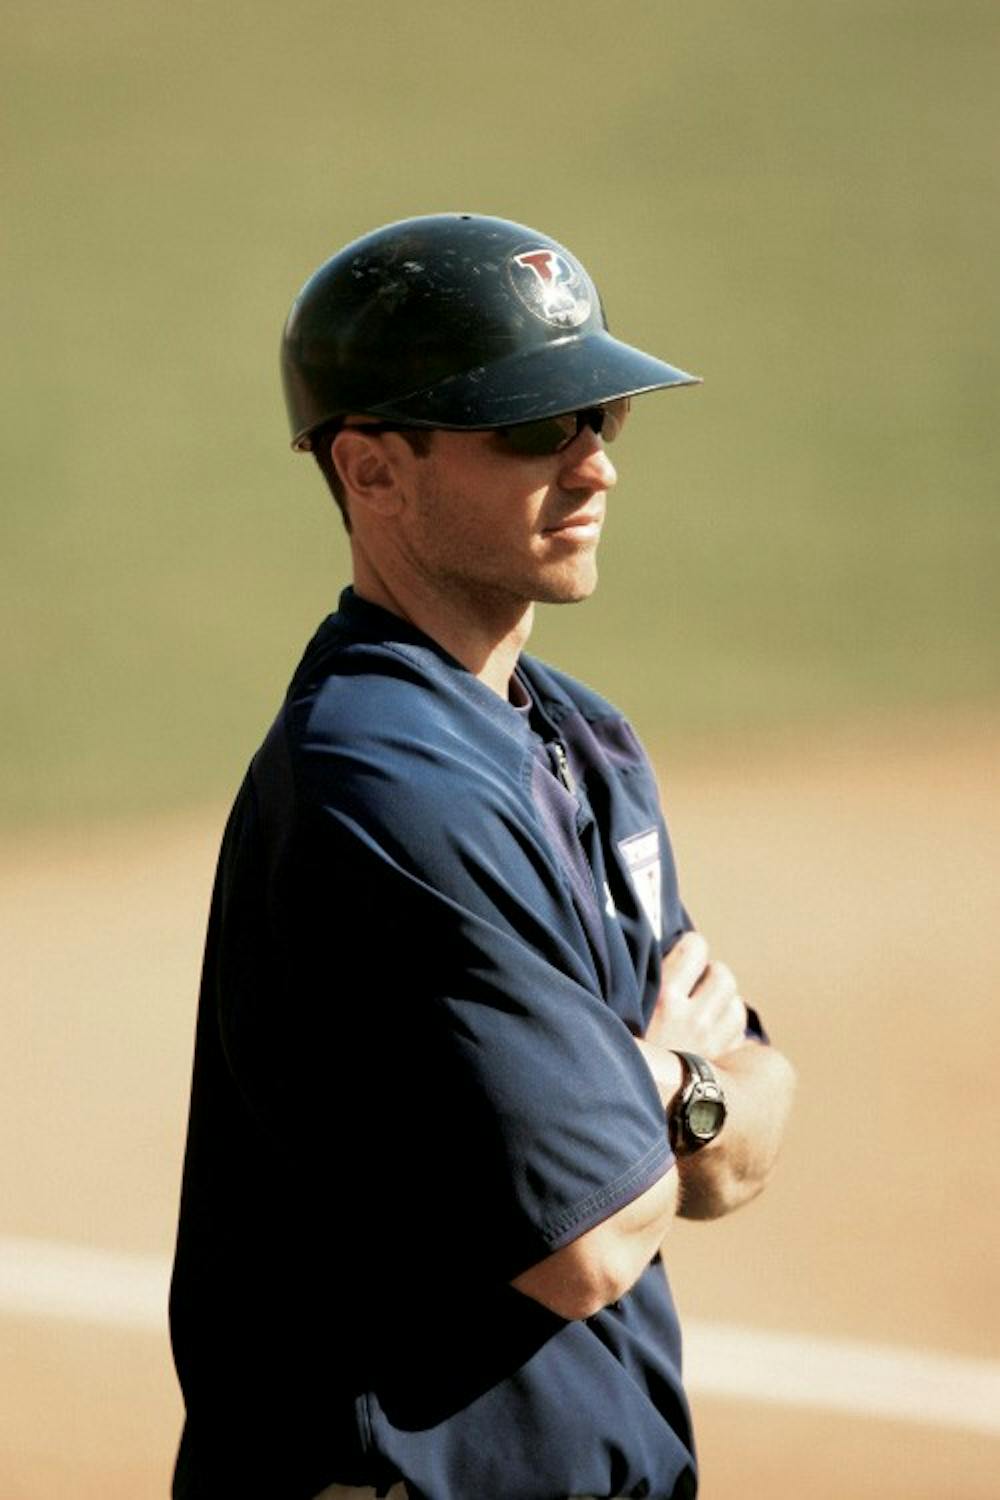 Penn baseball has been done in by Columbia in each of coach John Yurkow's first two seasons.